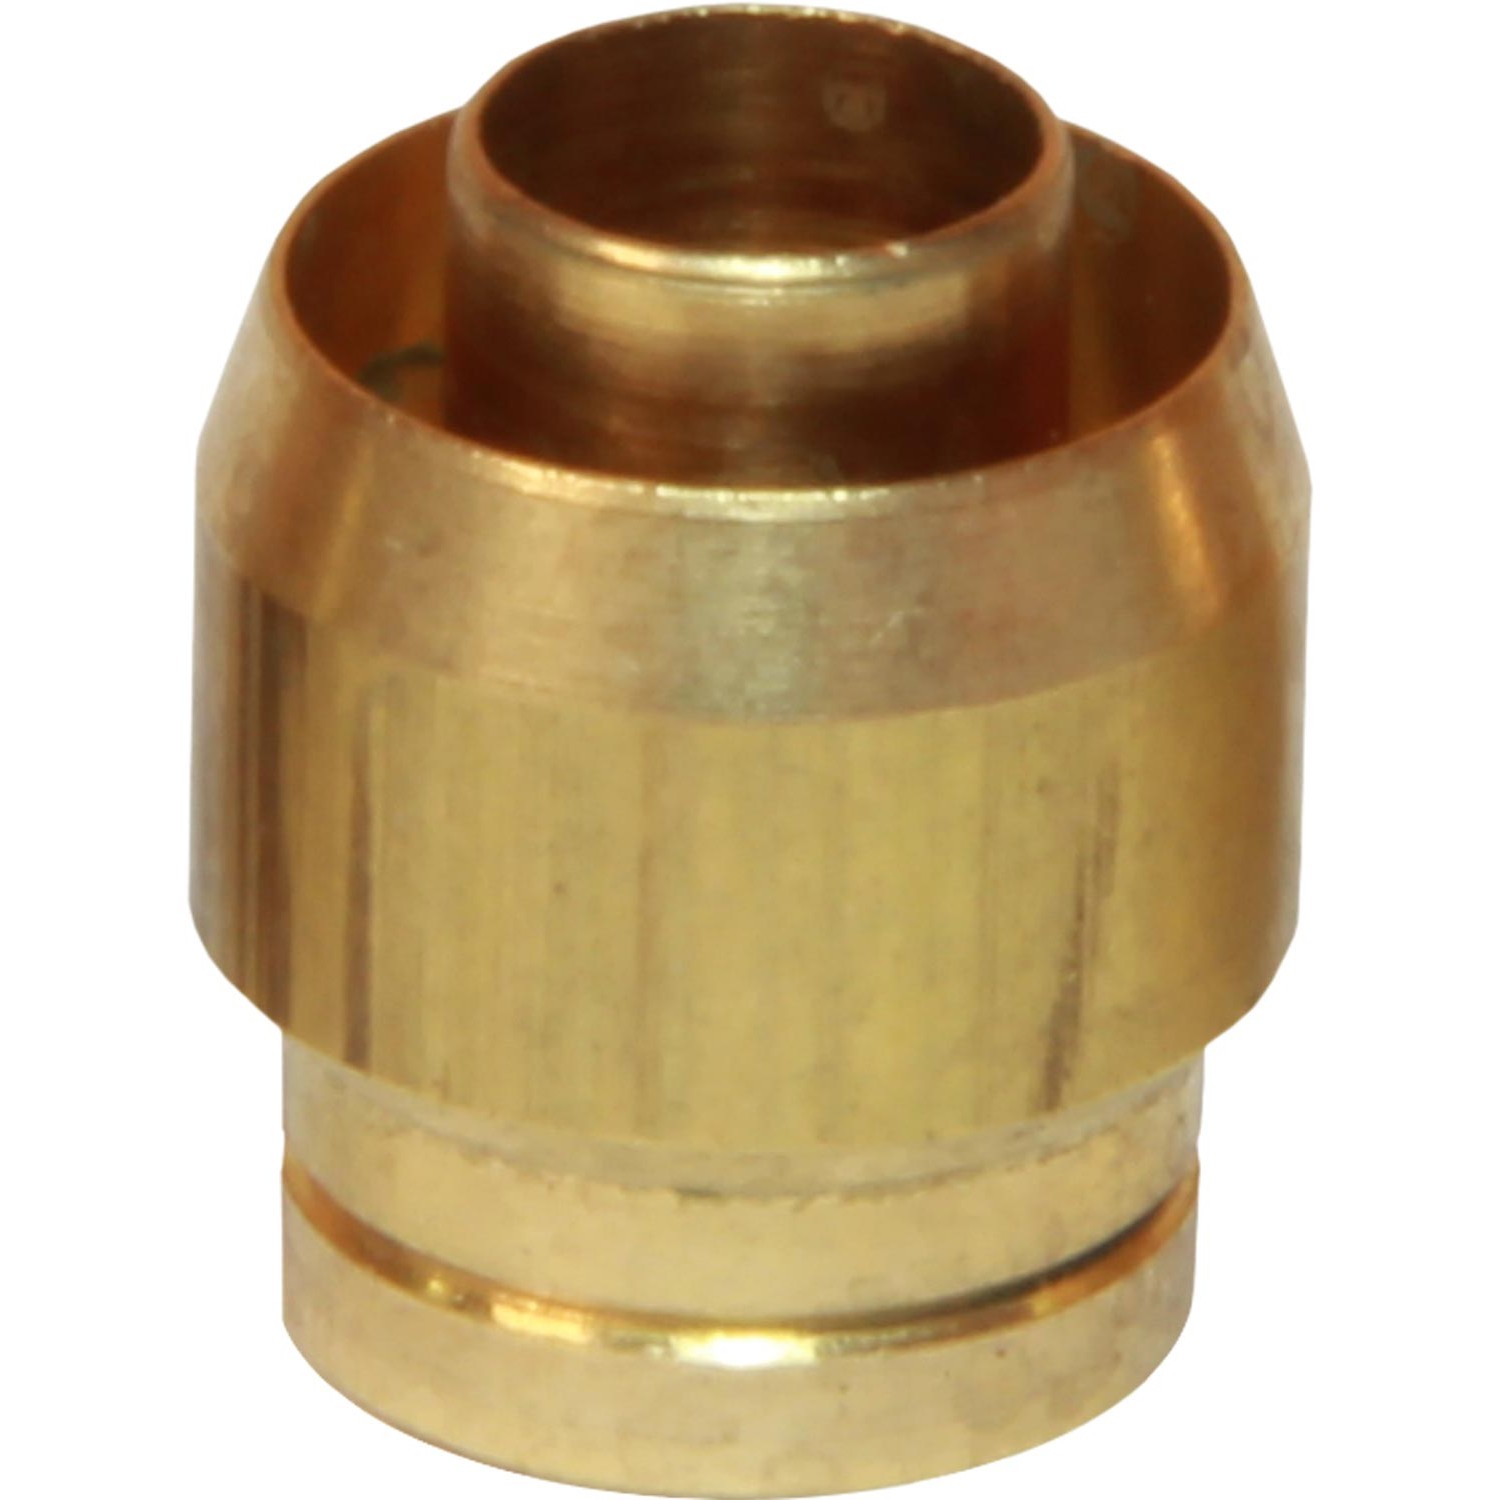 BARREL OLIVES METRIC BRASS 8MM PLUMBING COMPRESSION FUEL COPPER PIPE QTY 10 